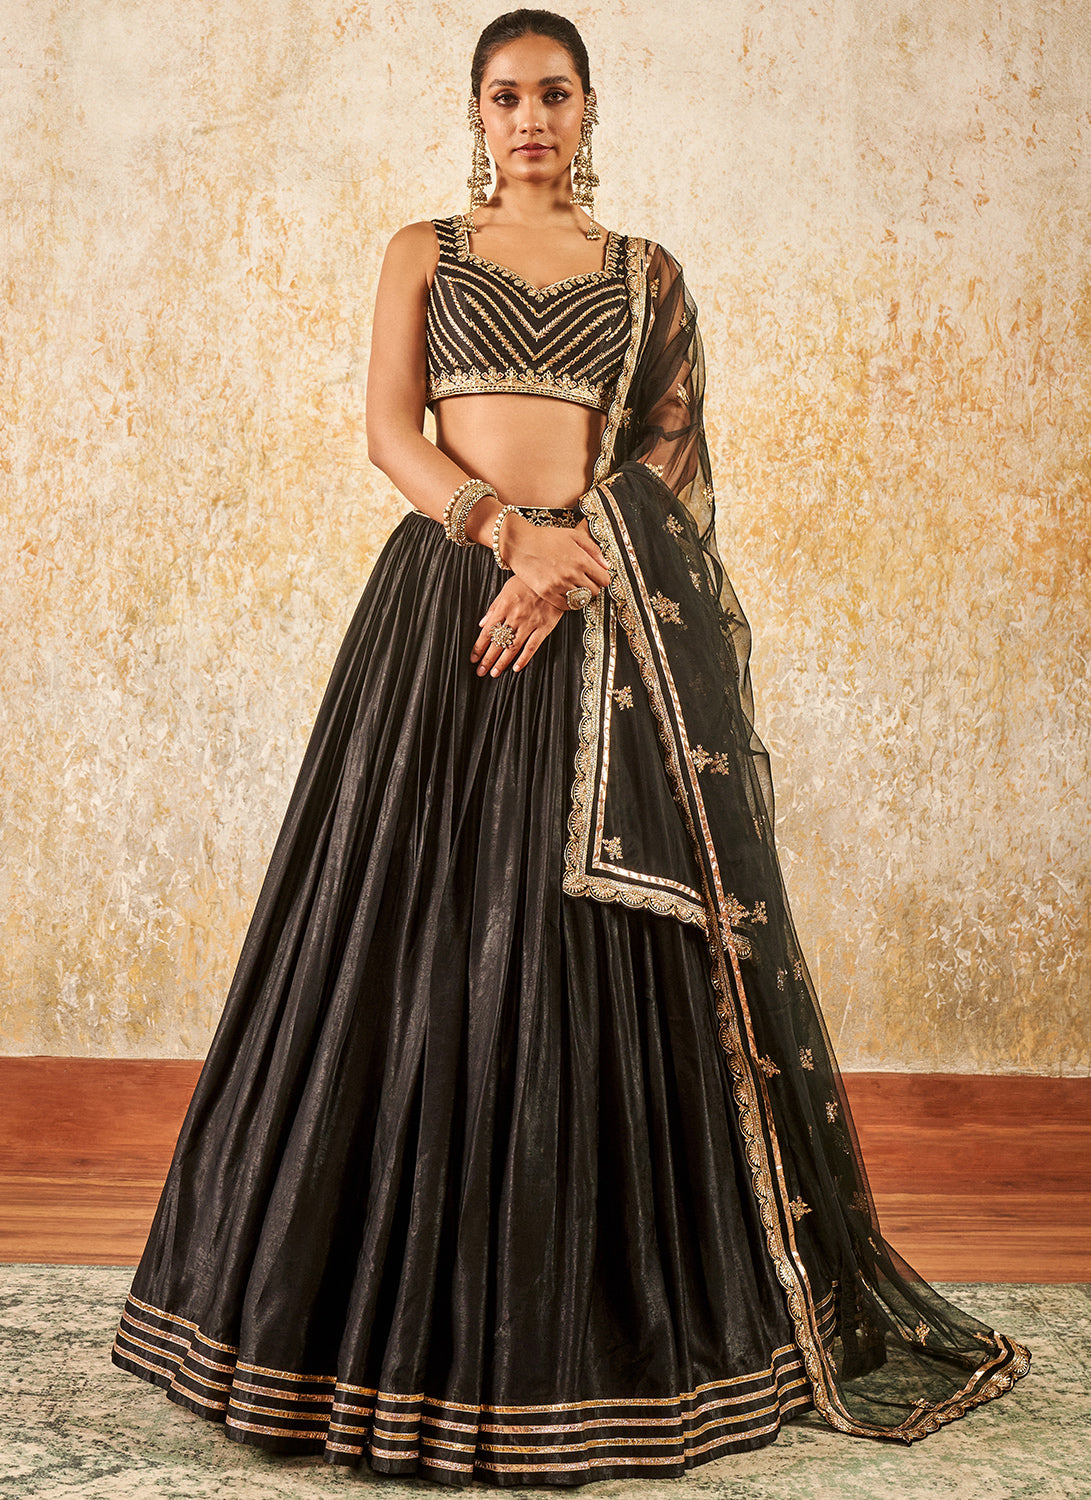 Stylish Lehenga For Wedding Party That Will Make You Stand Out